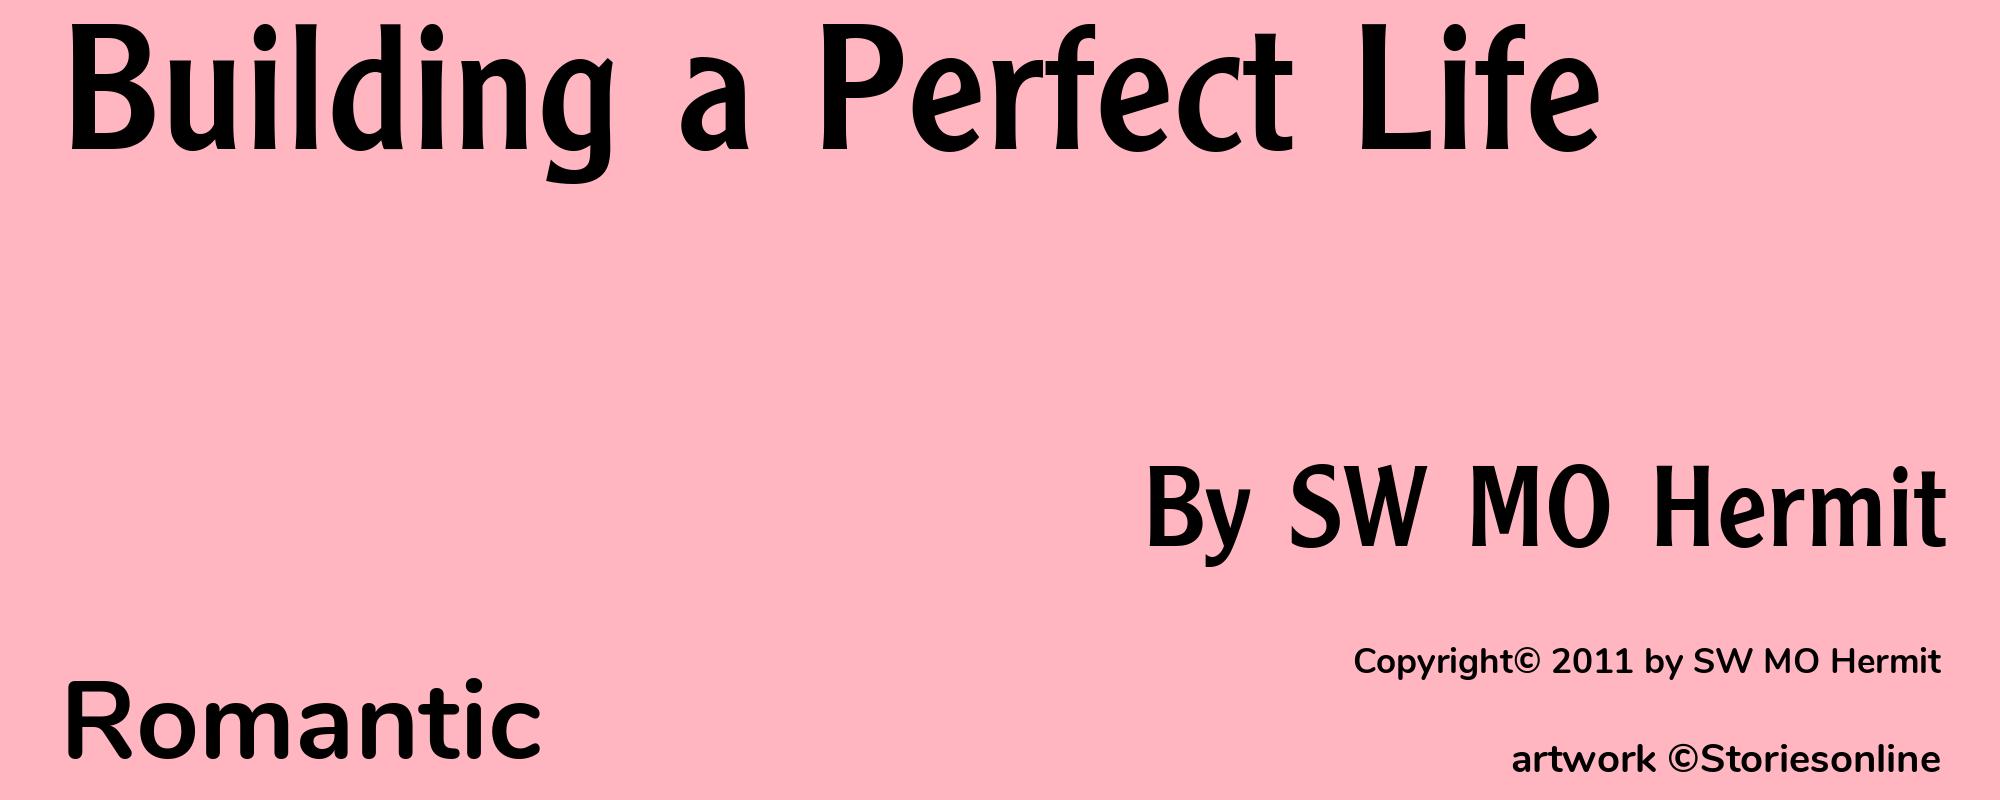 Building a Perfect Life - Cover